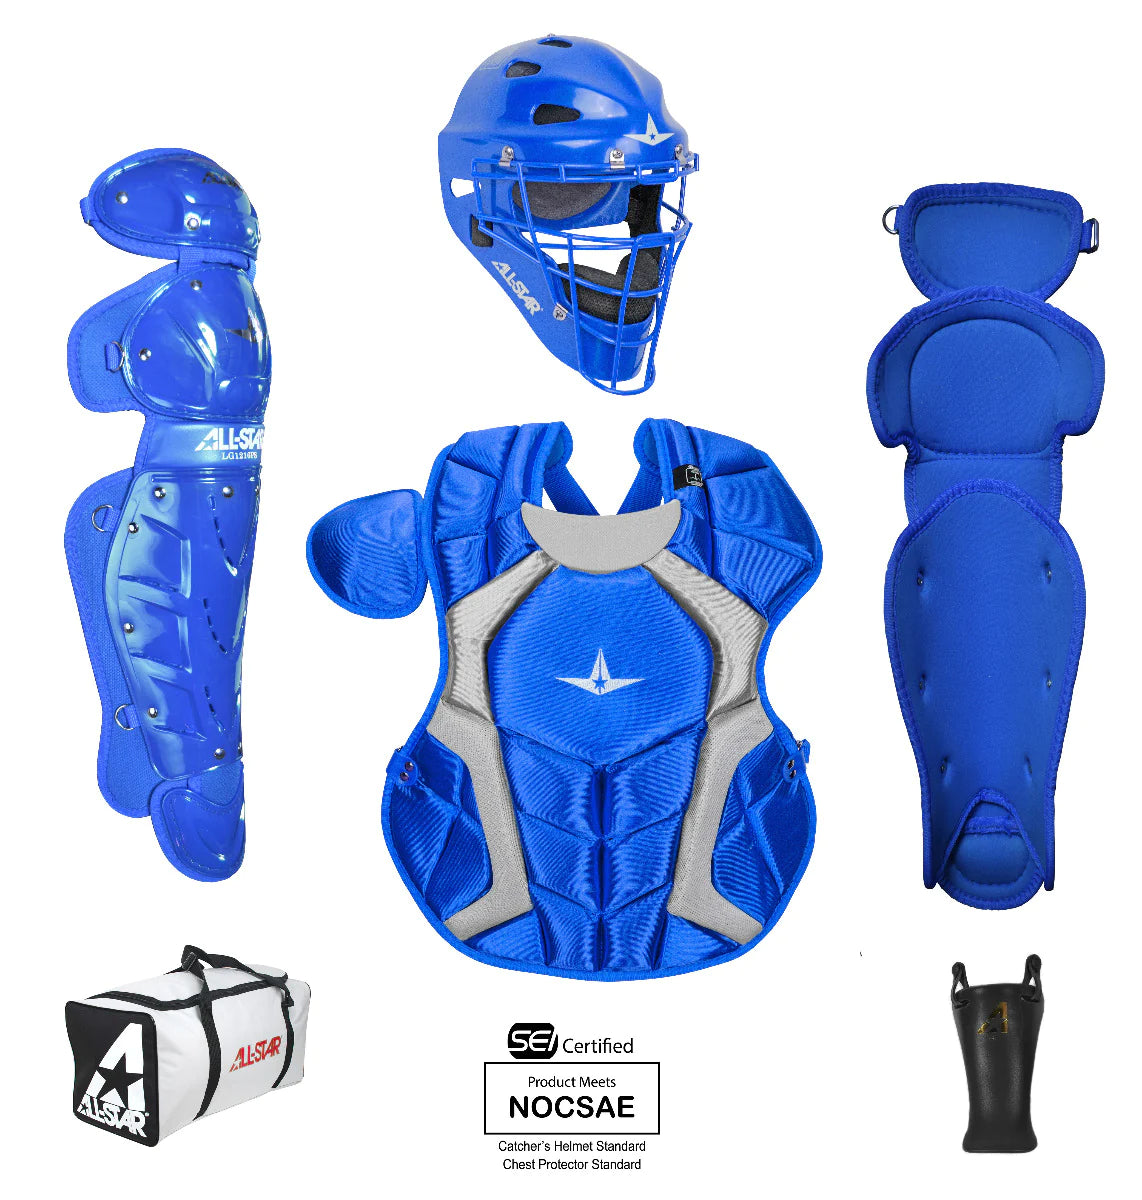 All-Star Player's Series Catching Kit 13.5" / Meets NOCSAE / Ages 7-9